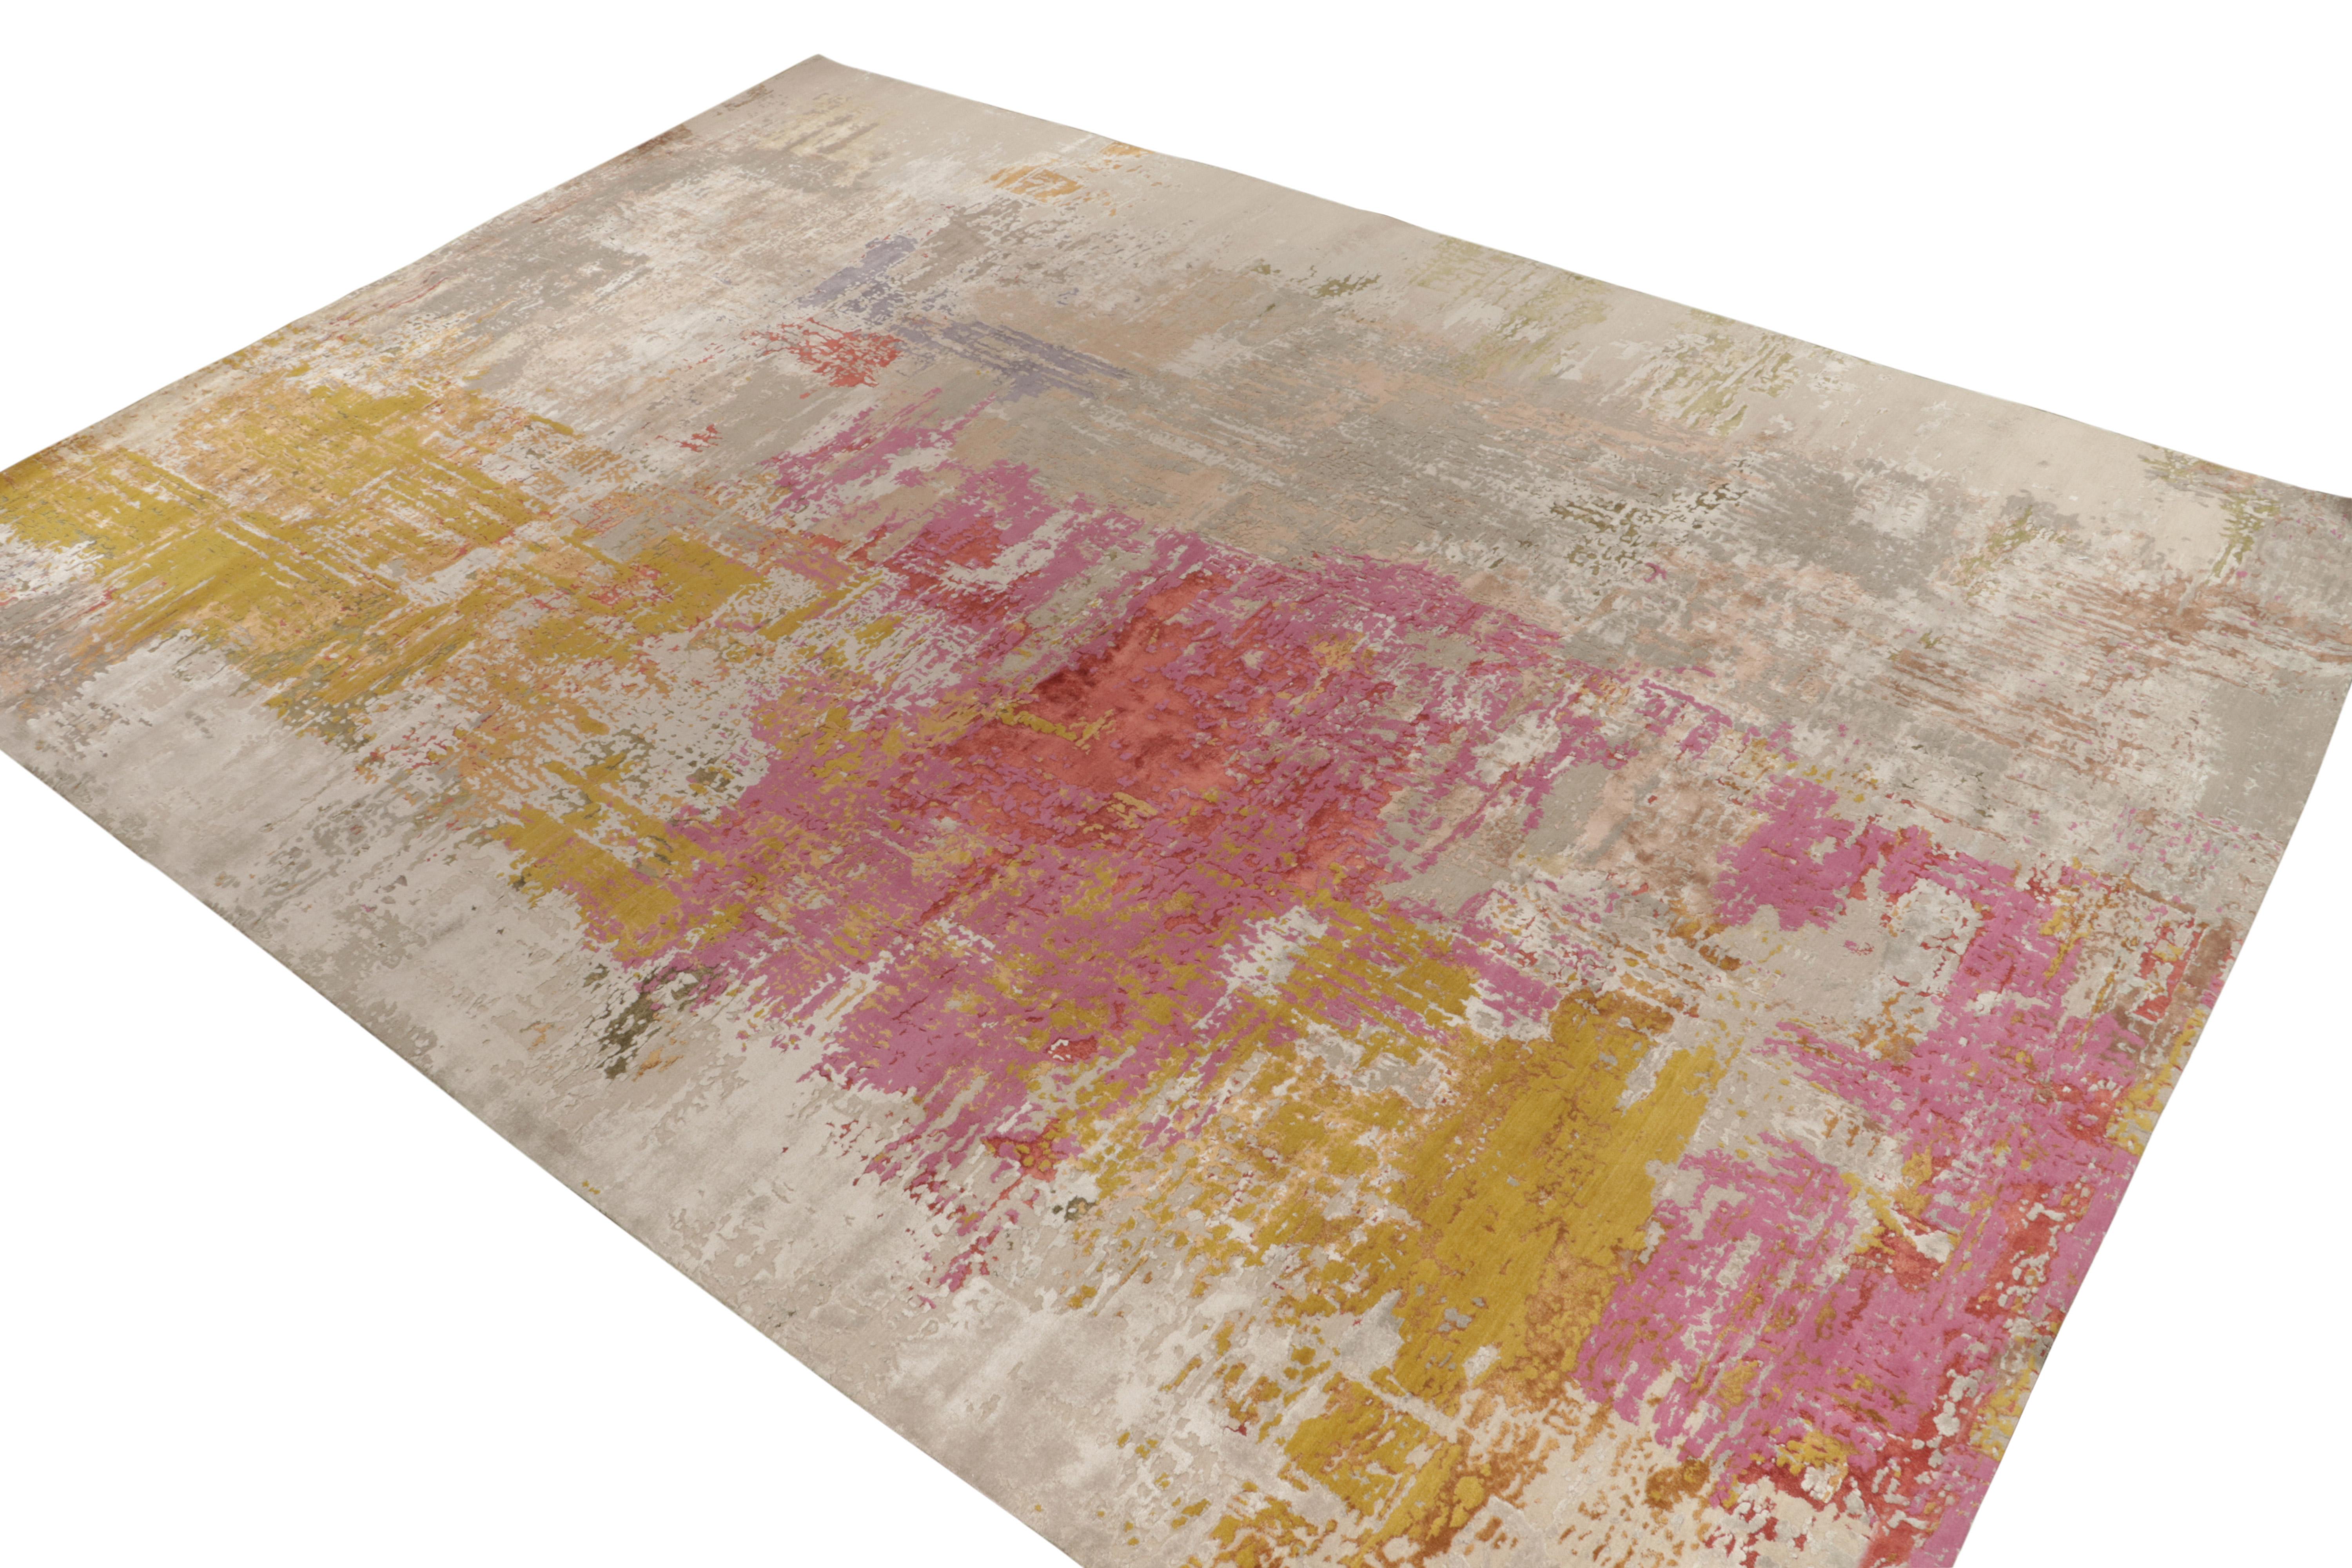 From Rug & Kilim’s modern works, a 14x20 piece enjoying bold painterly styles of abstract expressionism. The hand-knotted construction builds on wool that takes the dye graciously to play in pink, gold & gray tones. A unique palace size rug carrying